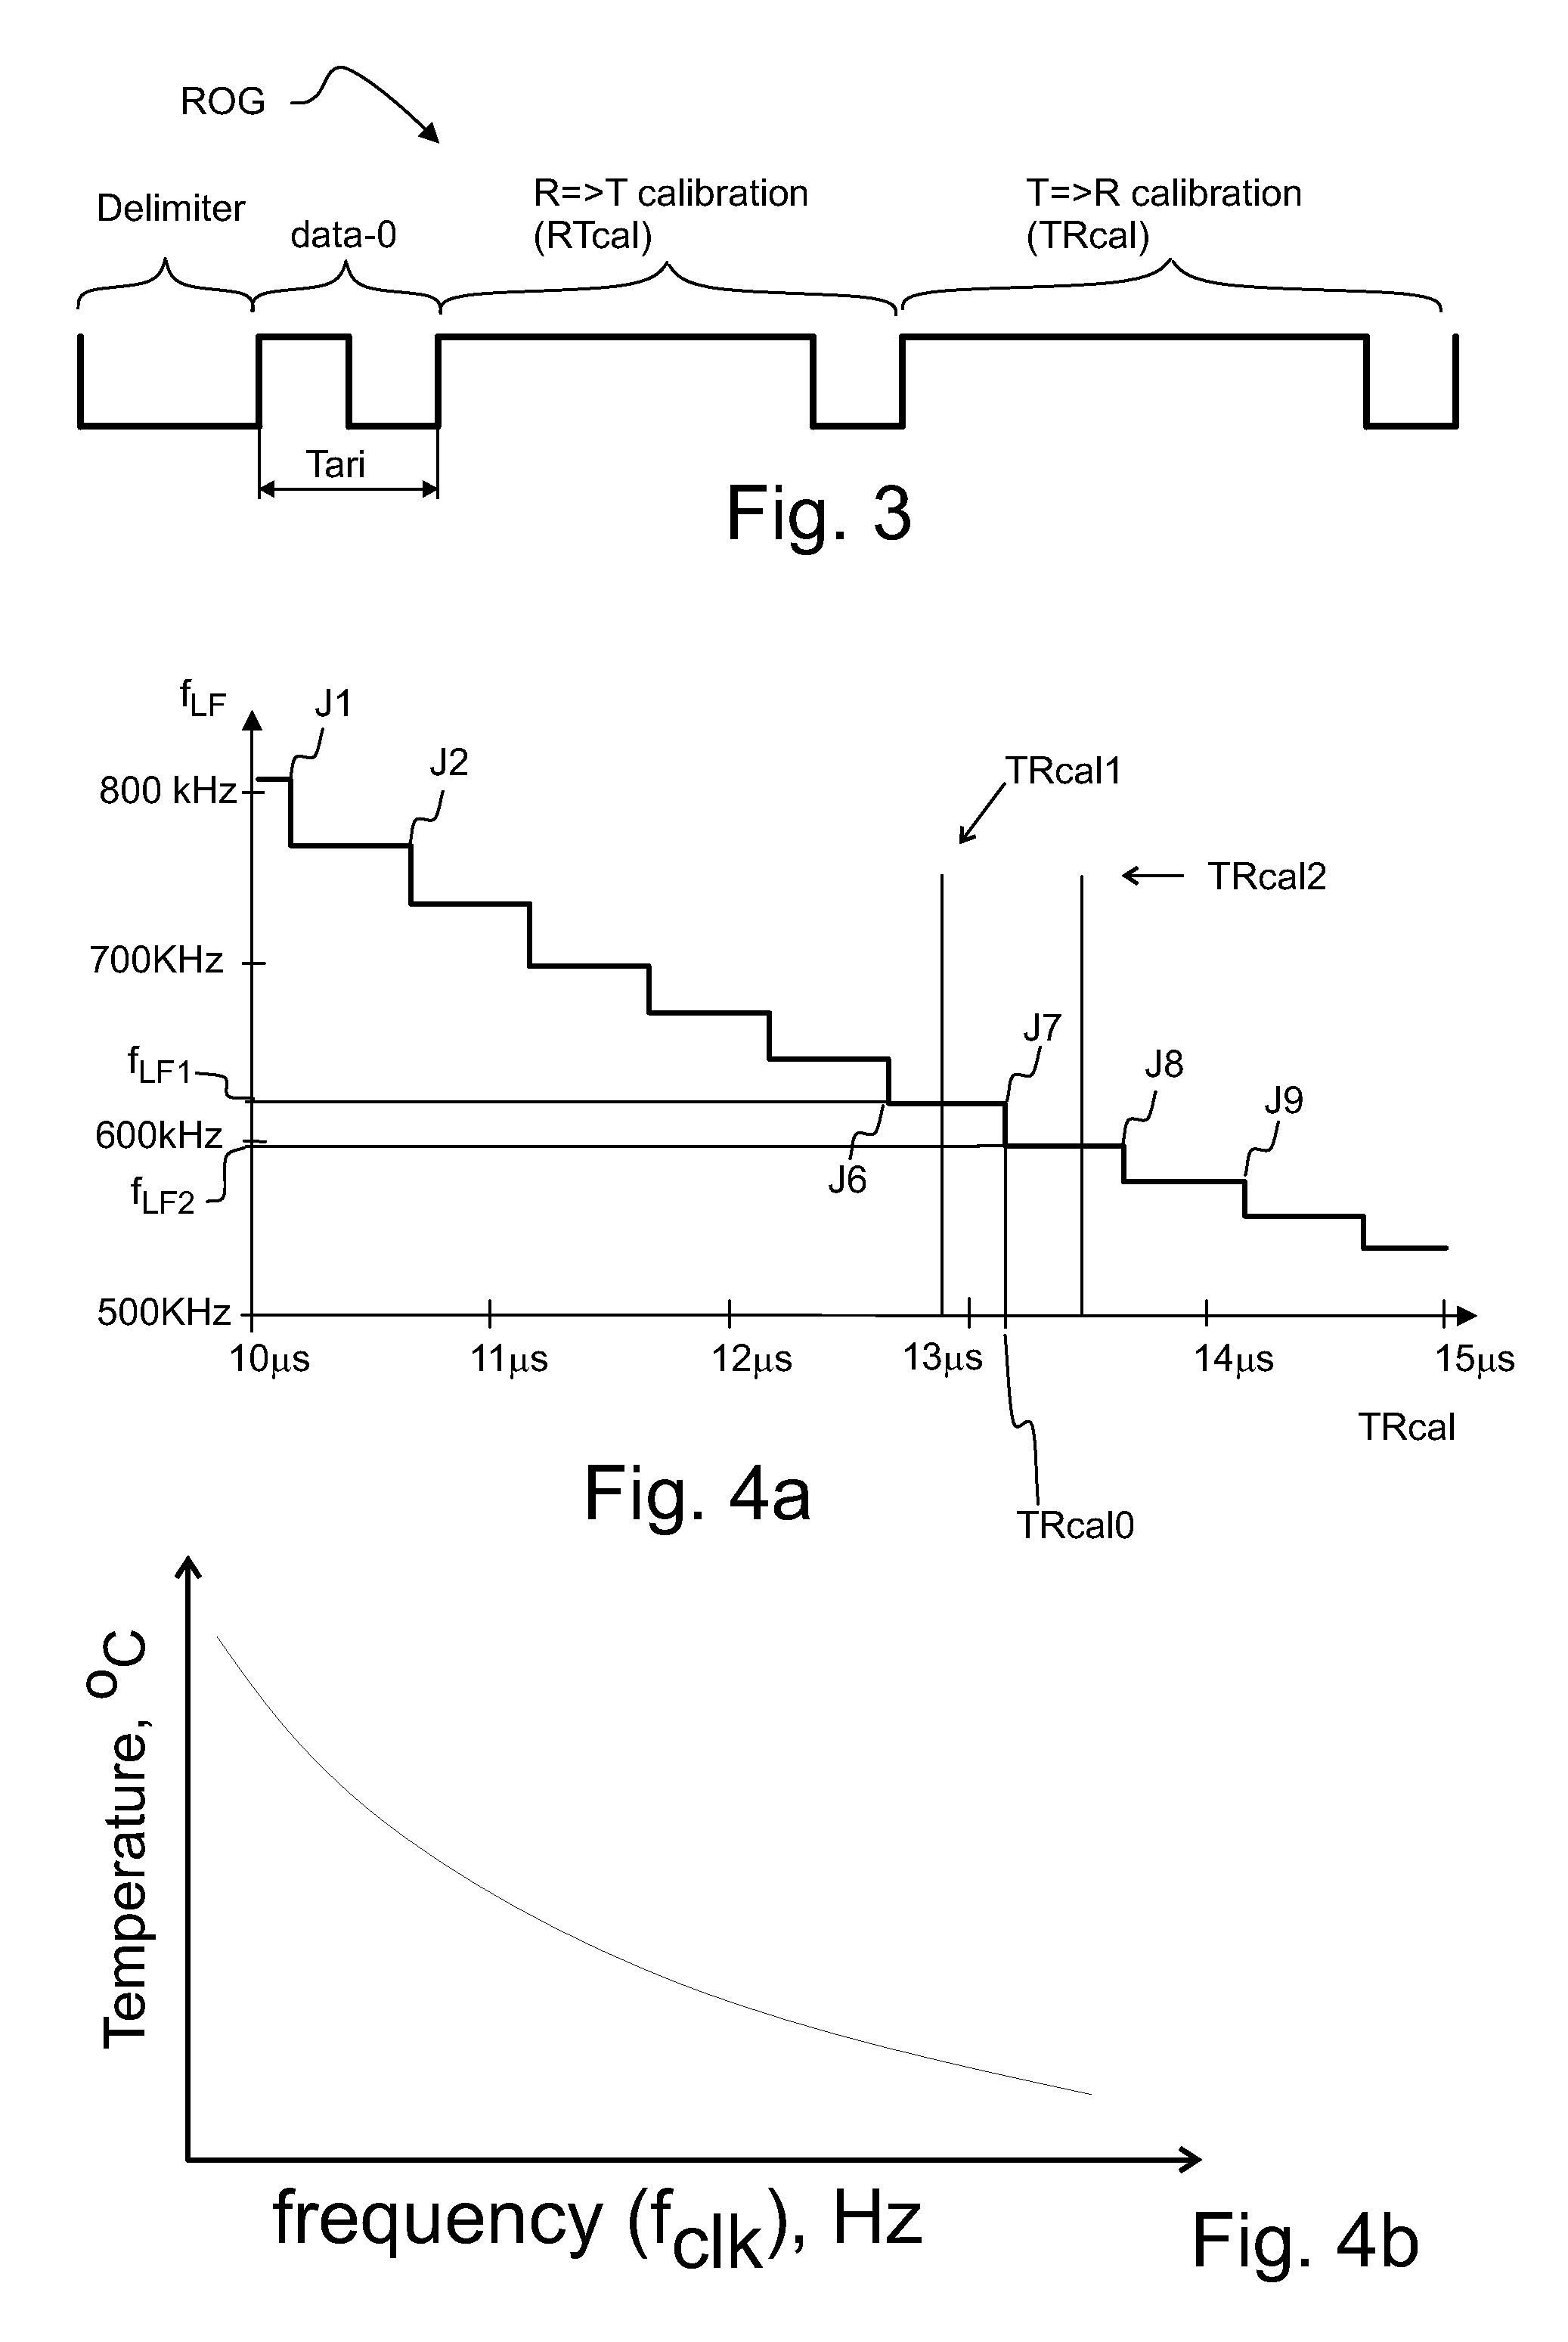 Methods for enhancing the accuracy of environment measurements using a remote-access apparatus